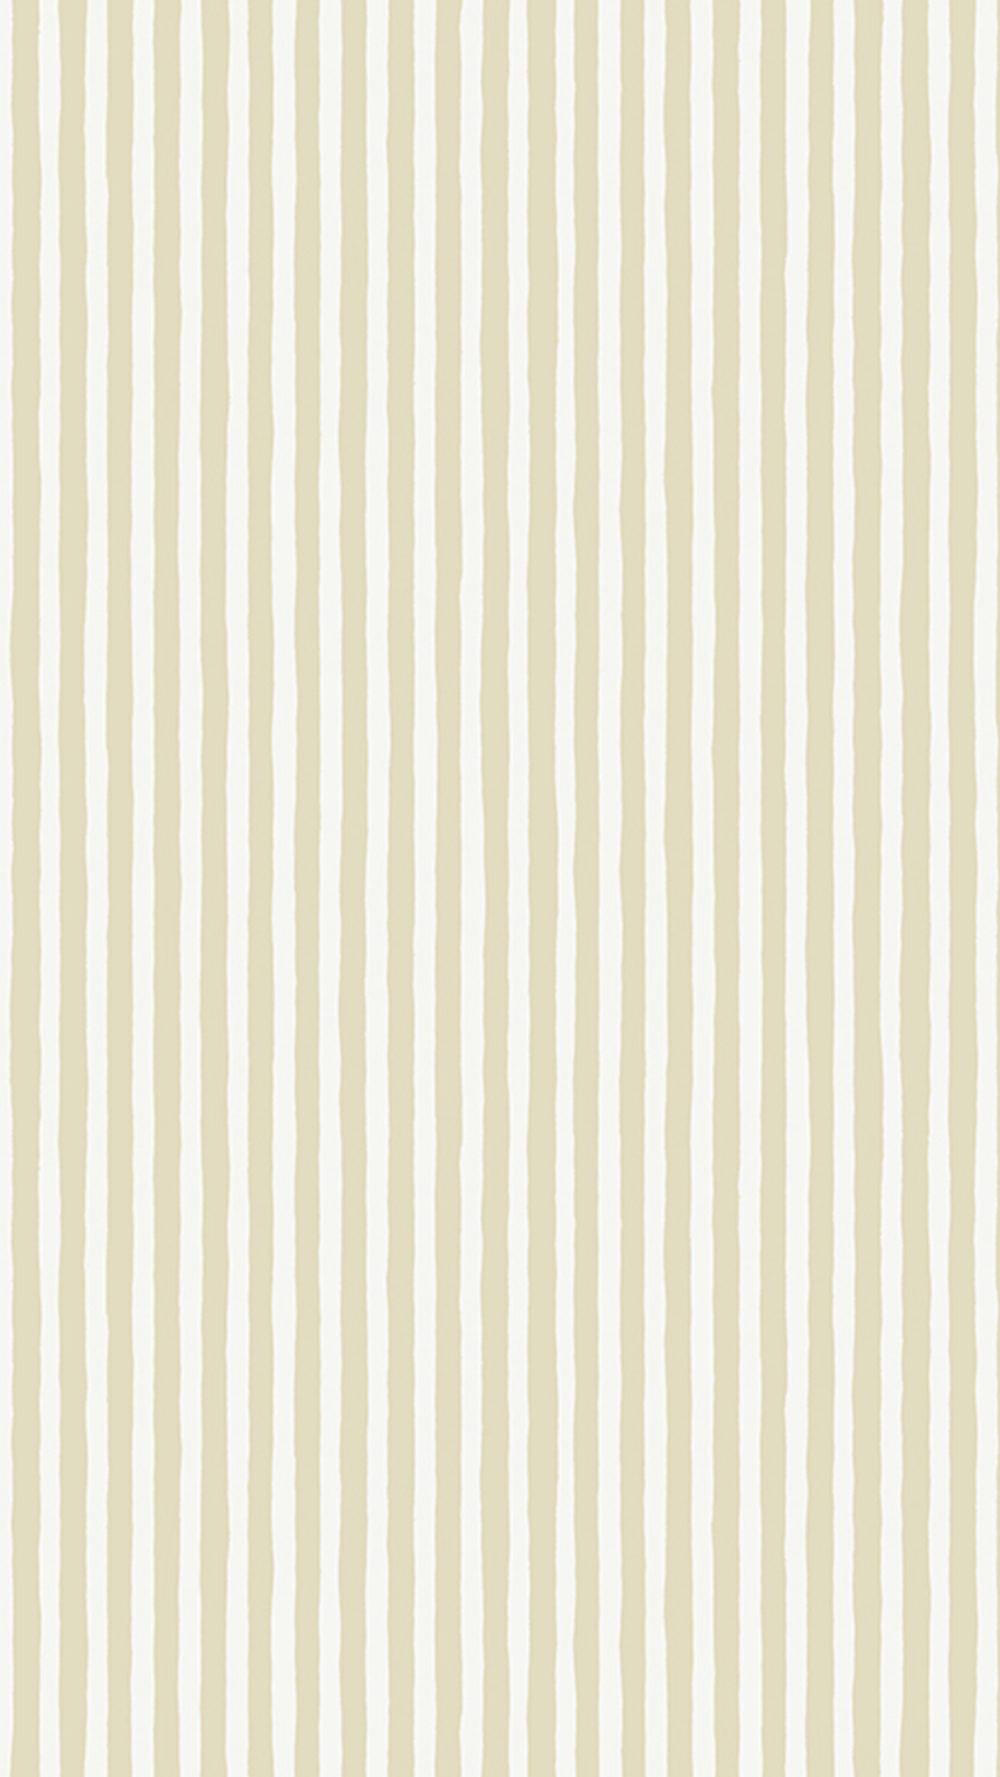 Hand Painted Stripe - Maitland Green - Cotswold White